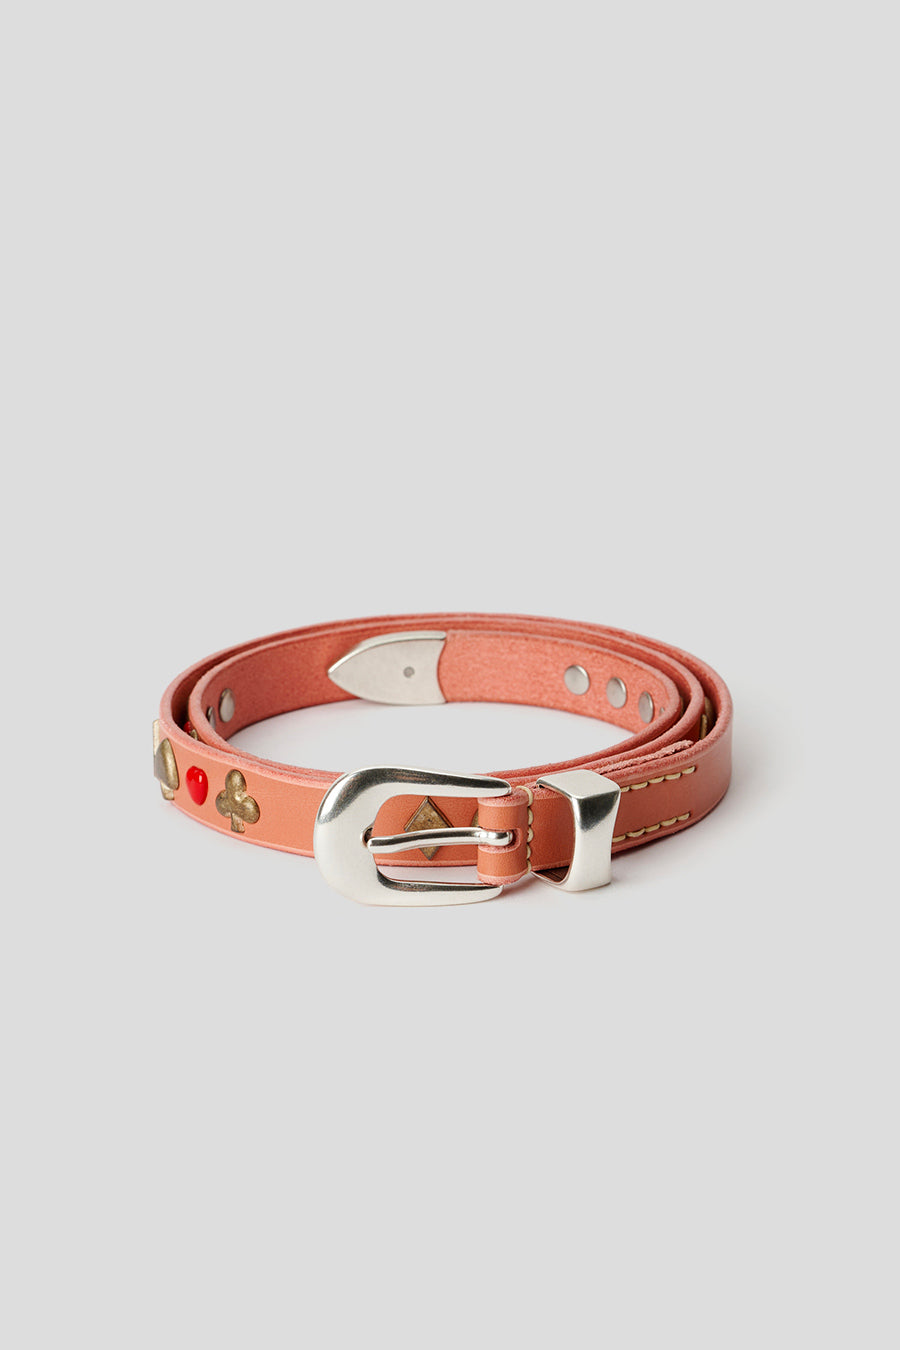 Our Legacy - CEINTURE 2CM CARD DECK TASTY PINK LEATHER - LE LABO STORE